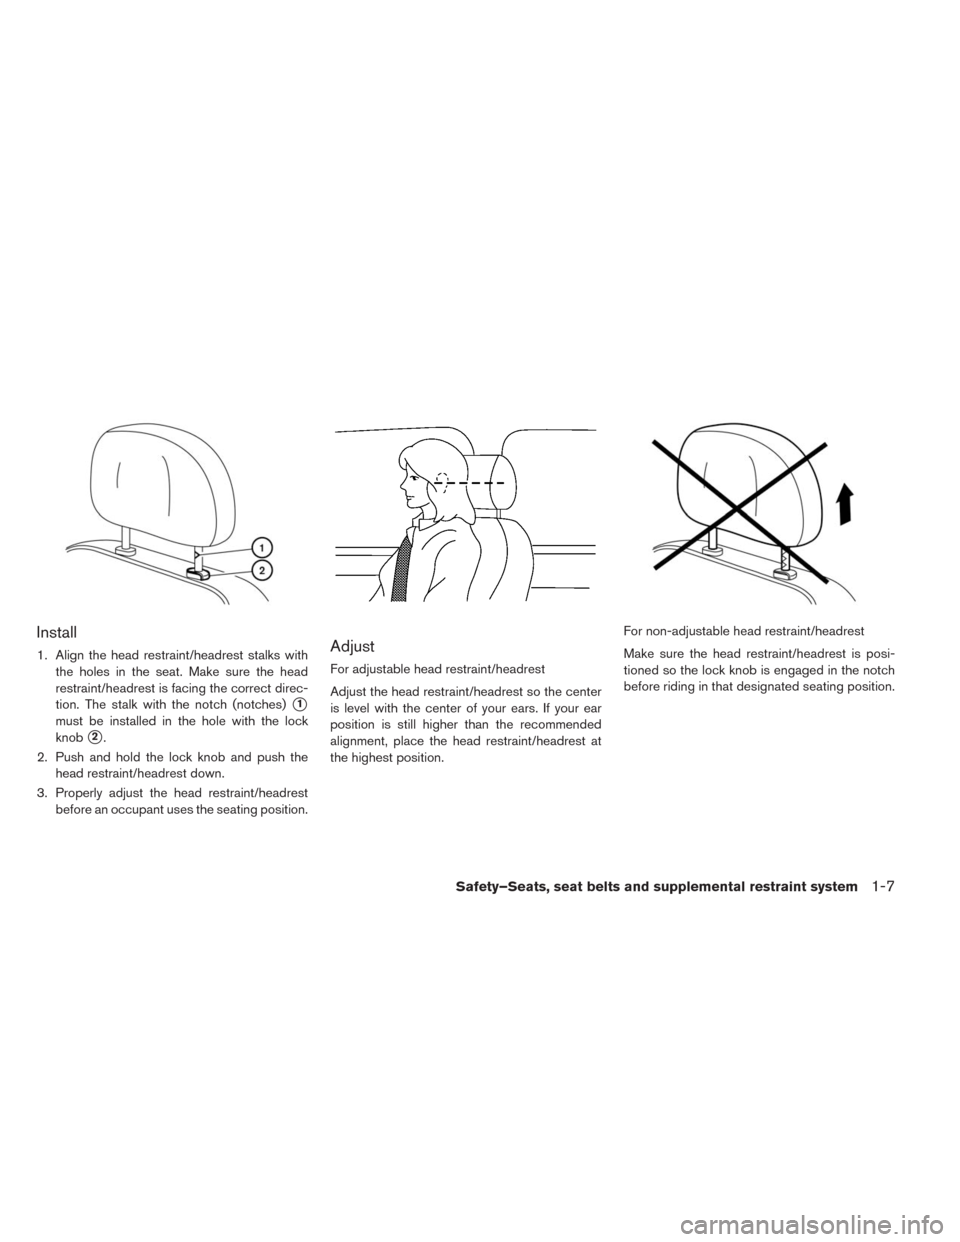 NISSAN LEAF 2014 1.G Owners Manual Install
1. Align the head restraint/headrest stalks with
the holes in the seat. Make sure the head
restraint/headrest is facing the correct direc-
tion. The stalk with the notch (notches)
1
must be i